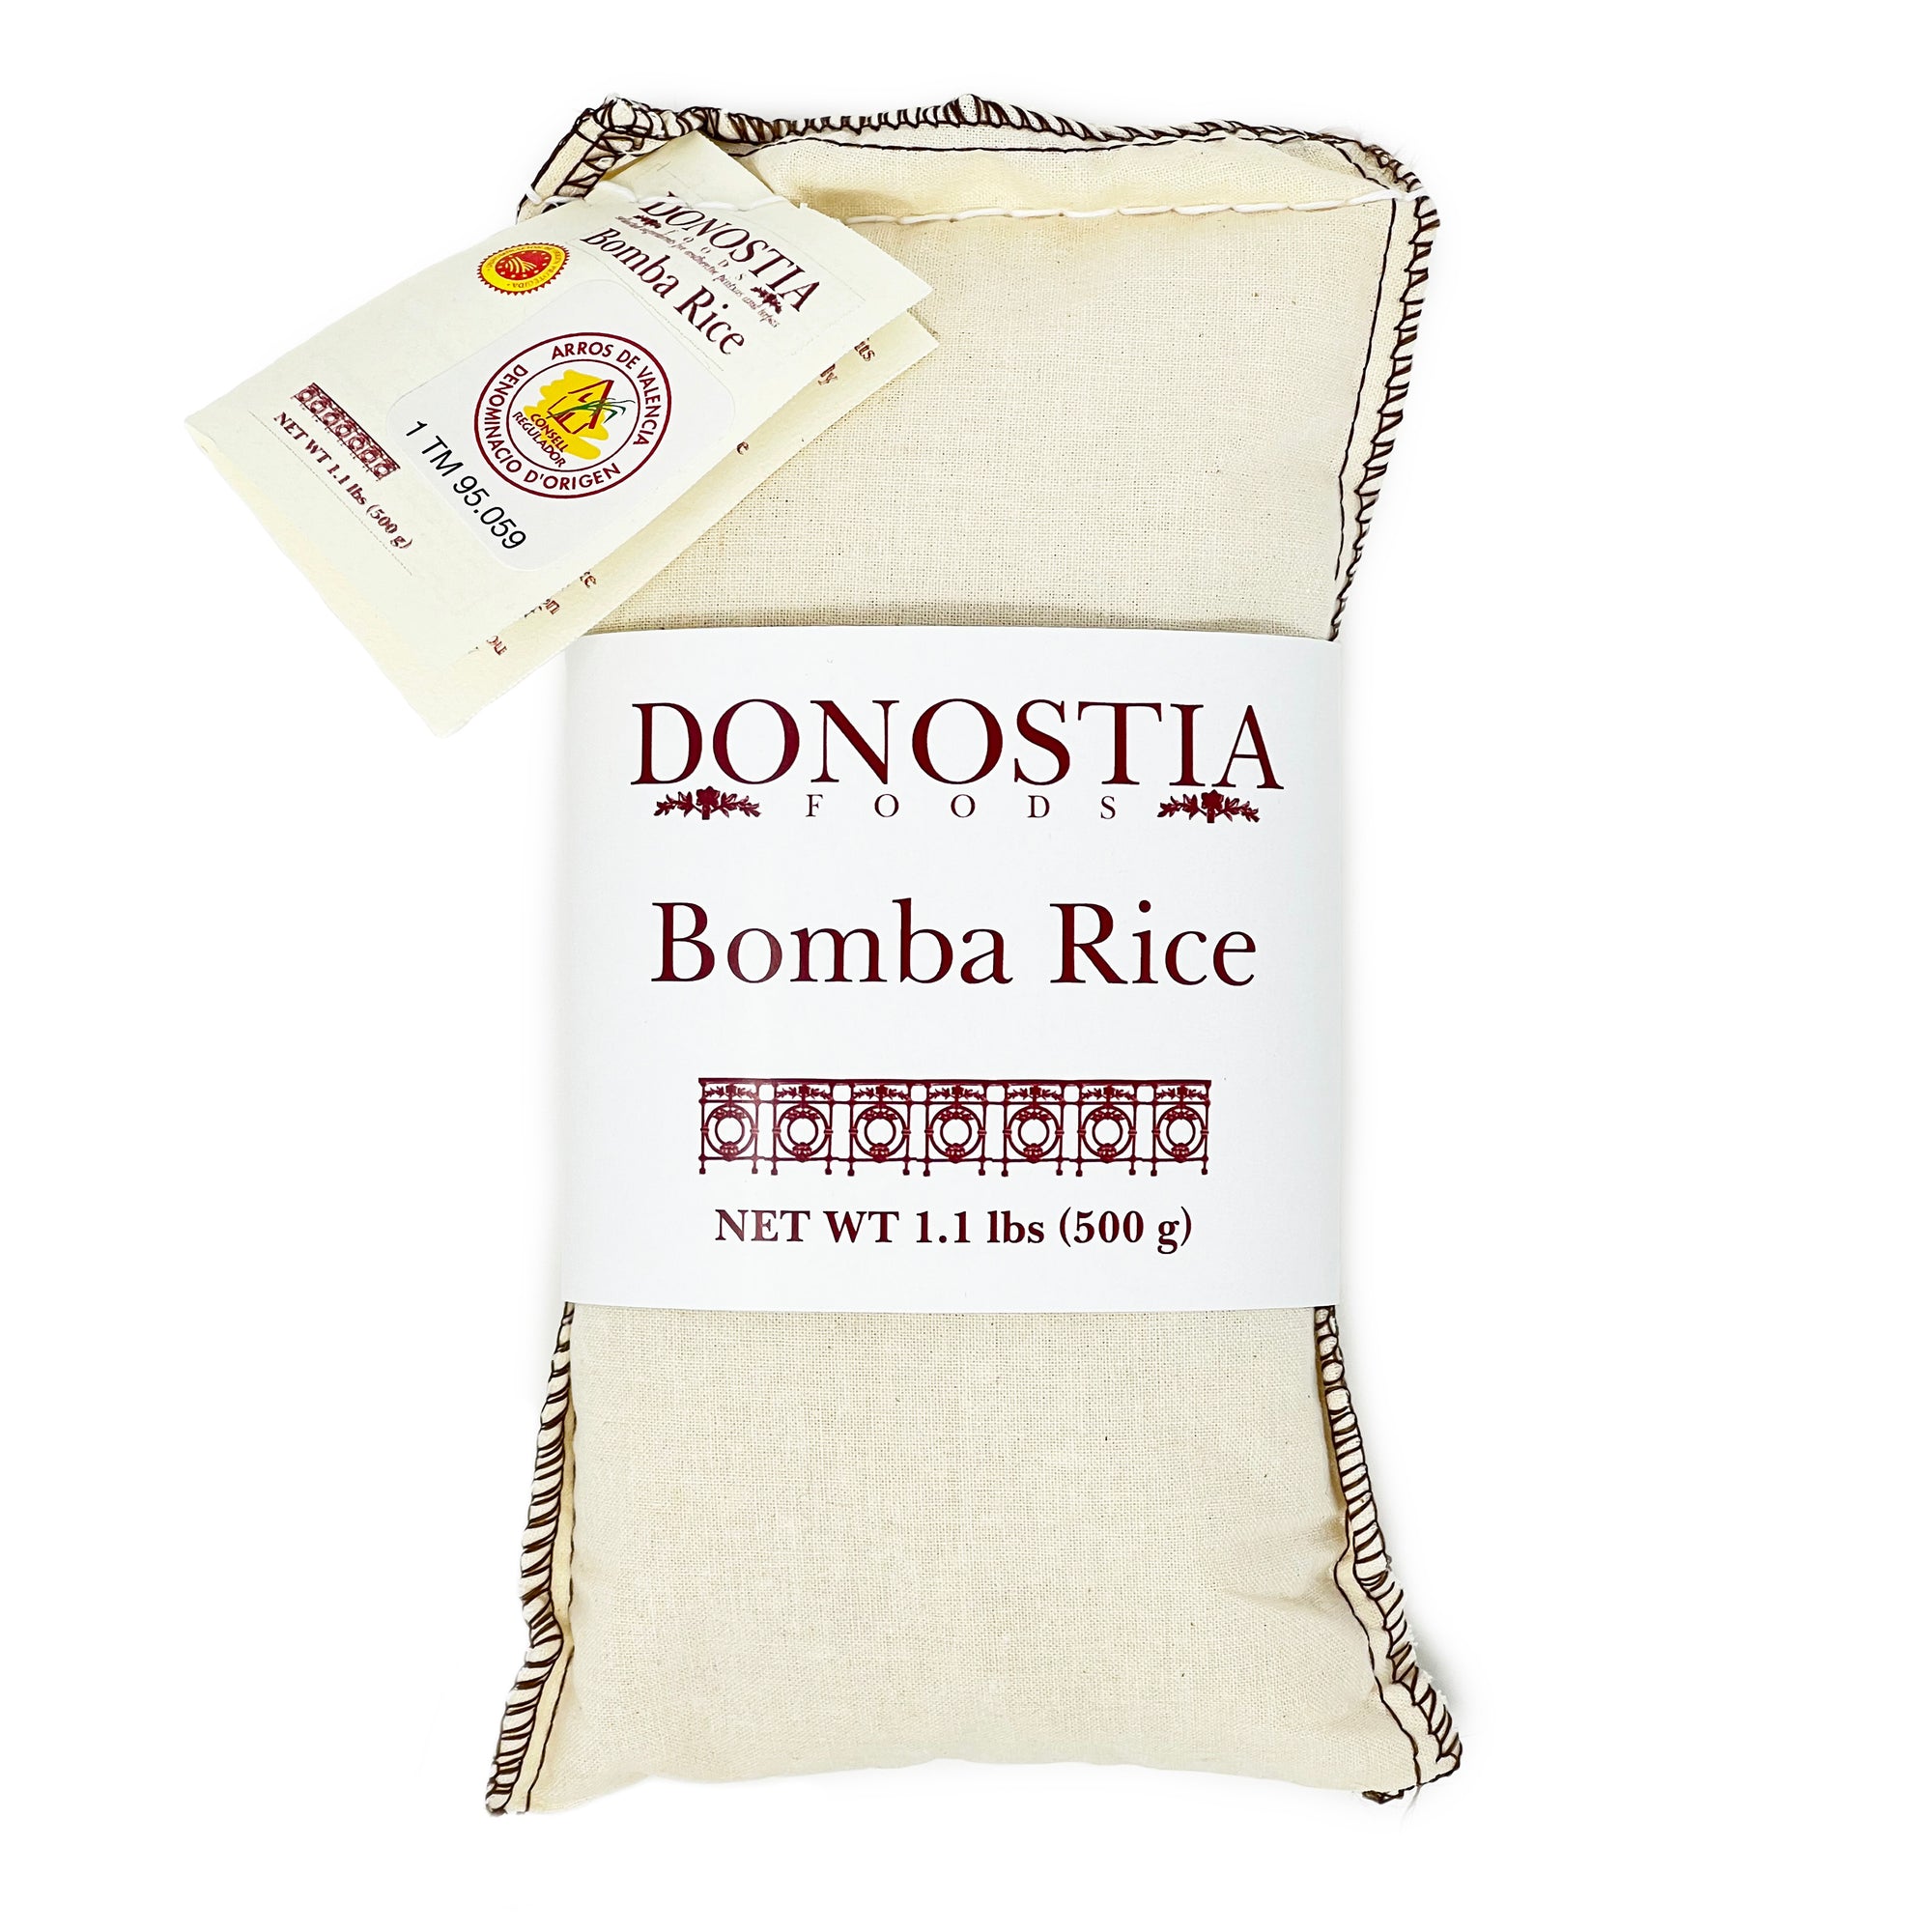 Bomba Rice in a bag - Donostia Foods